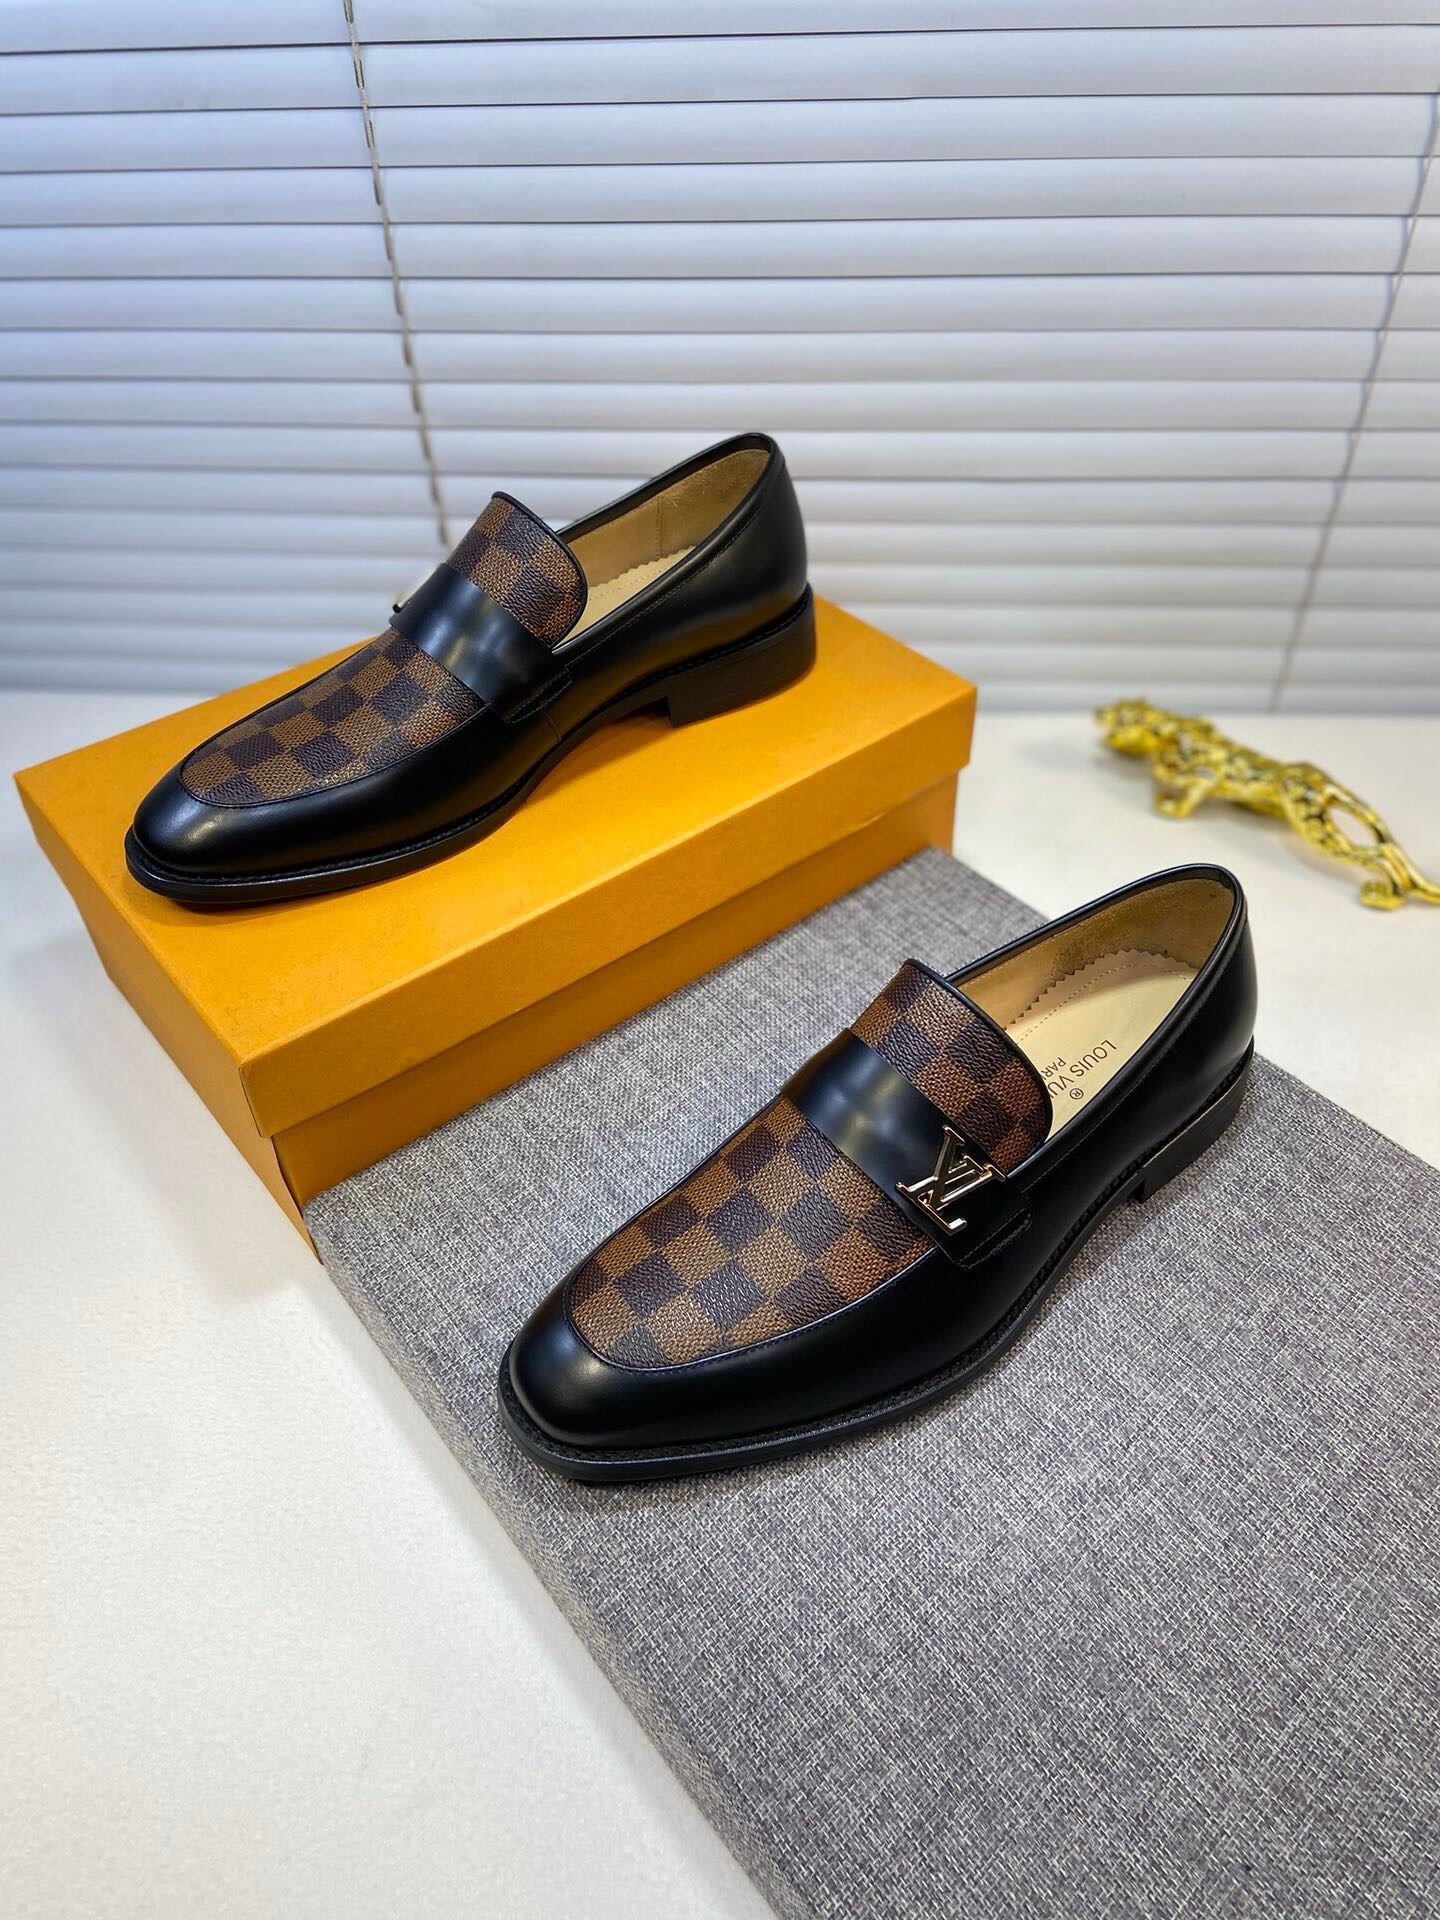 Louis Vuitton Mens Shoes Brown Suede Mocassins Loafers Gold Buckle 105   eBay